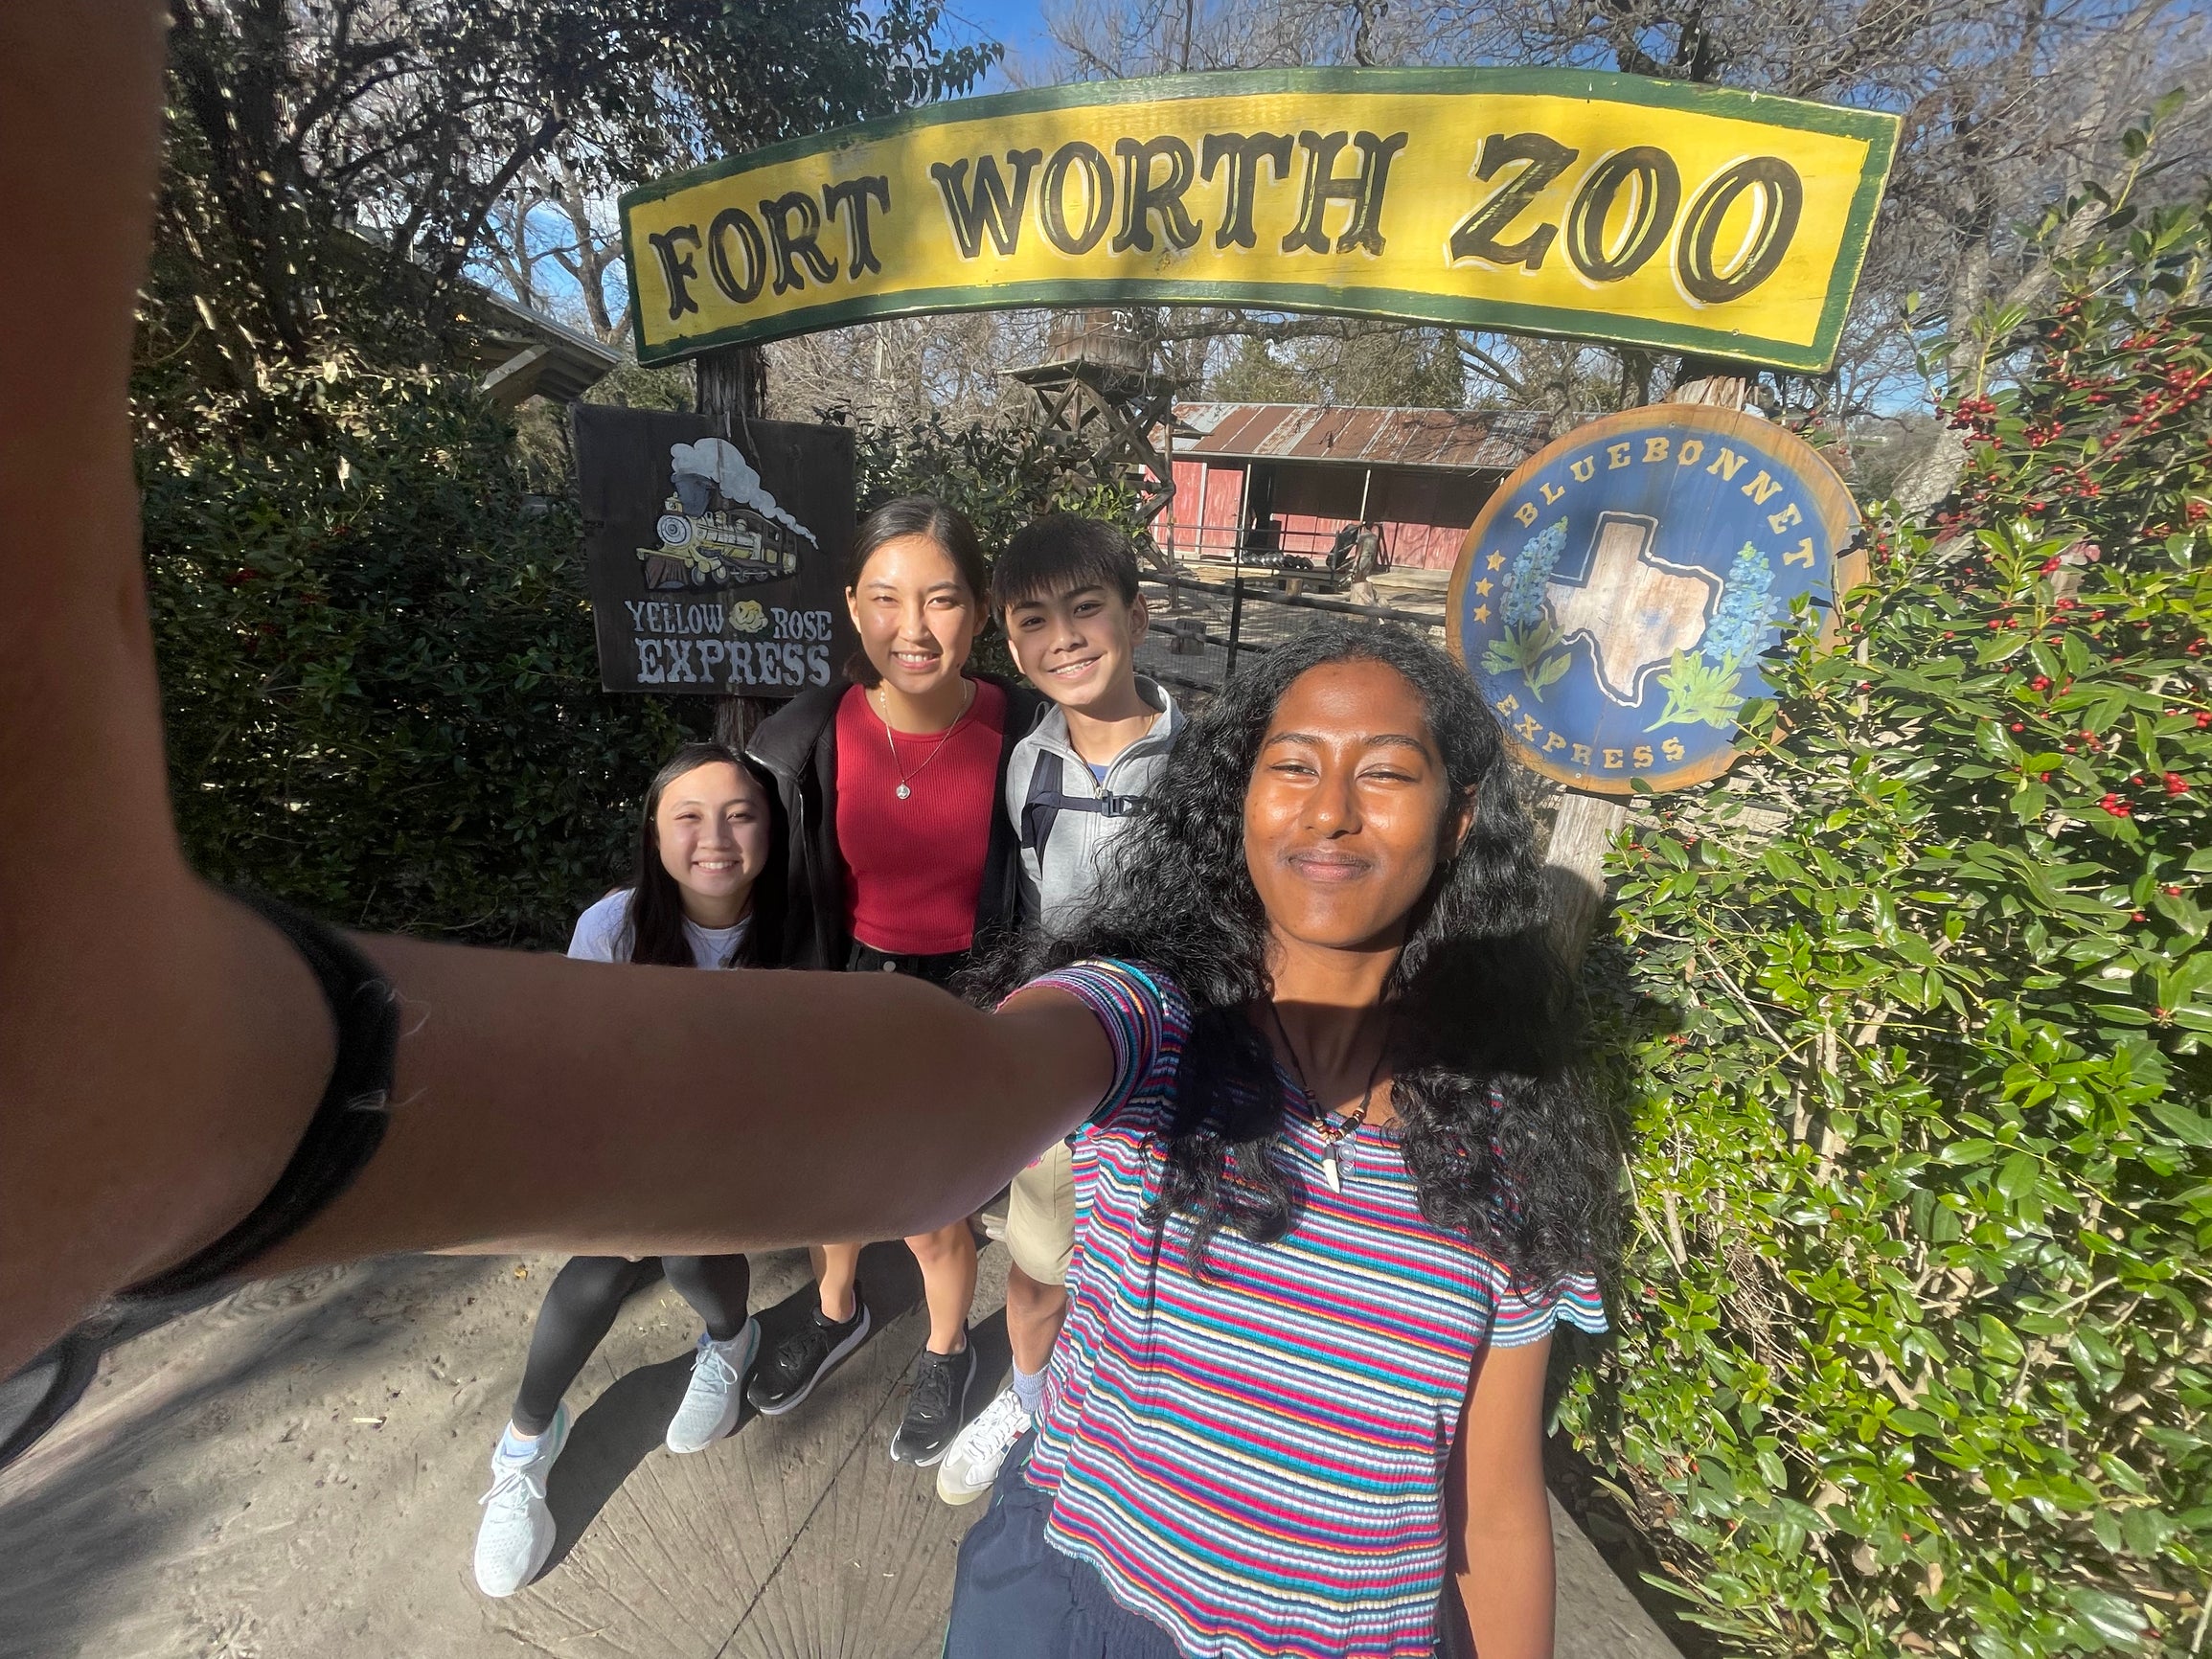 A selfie taken by one person with four people in frame and a "Fort Worth Zoo" sign behind them.